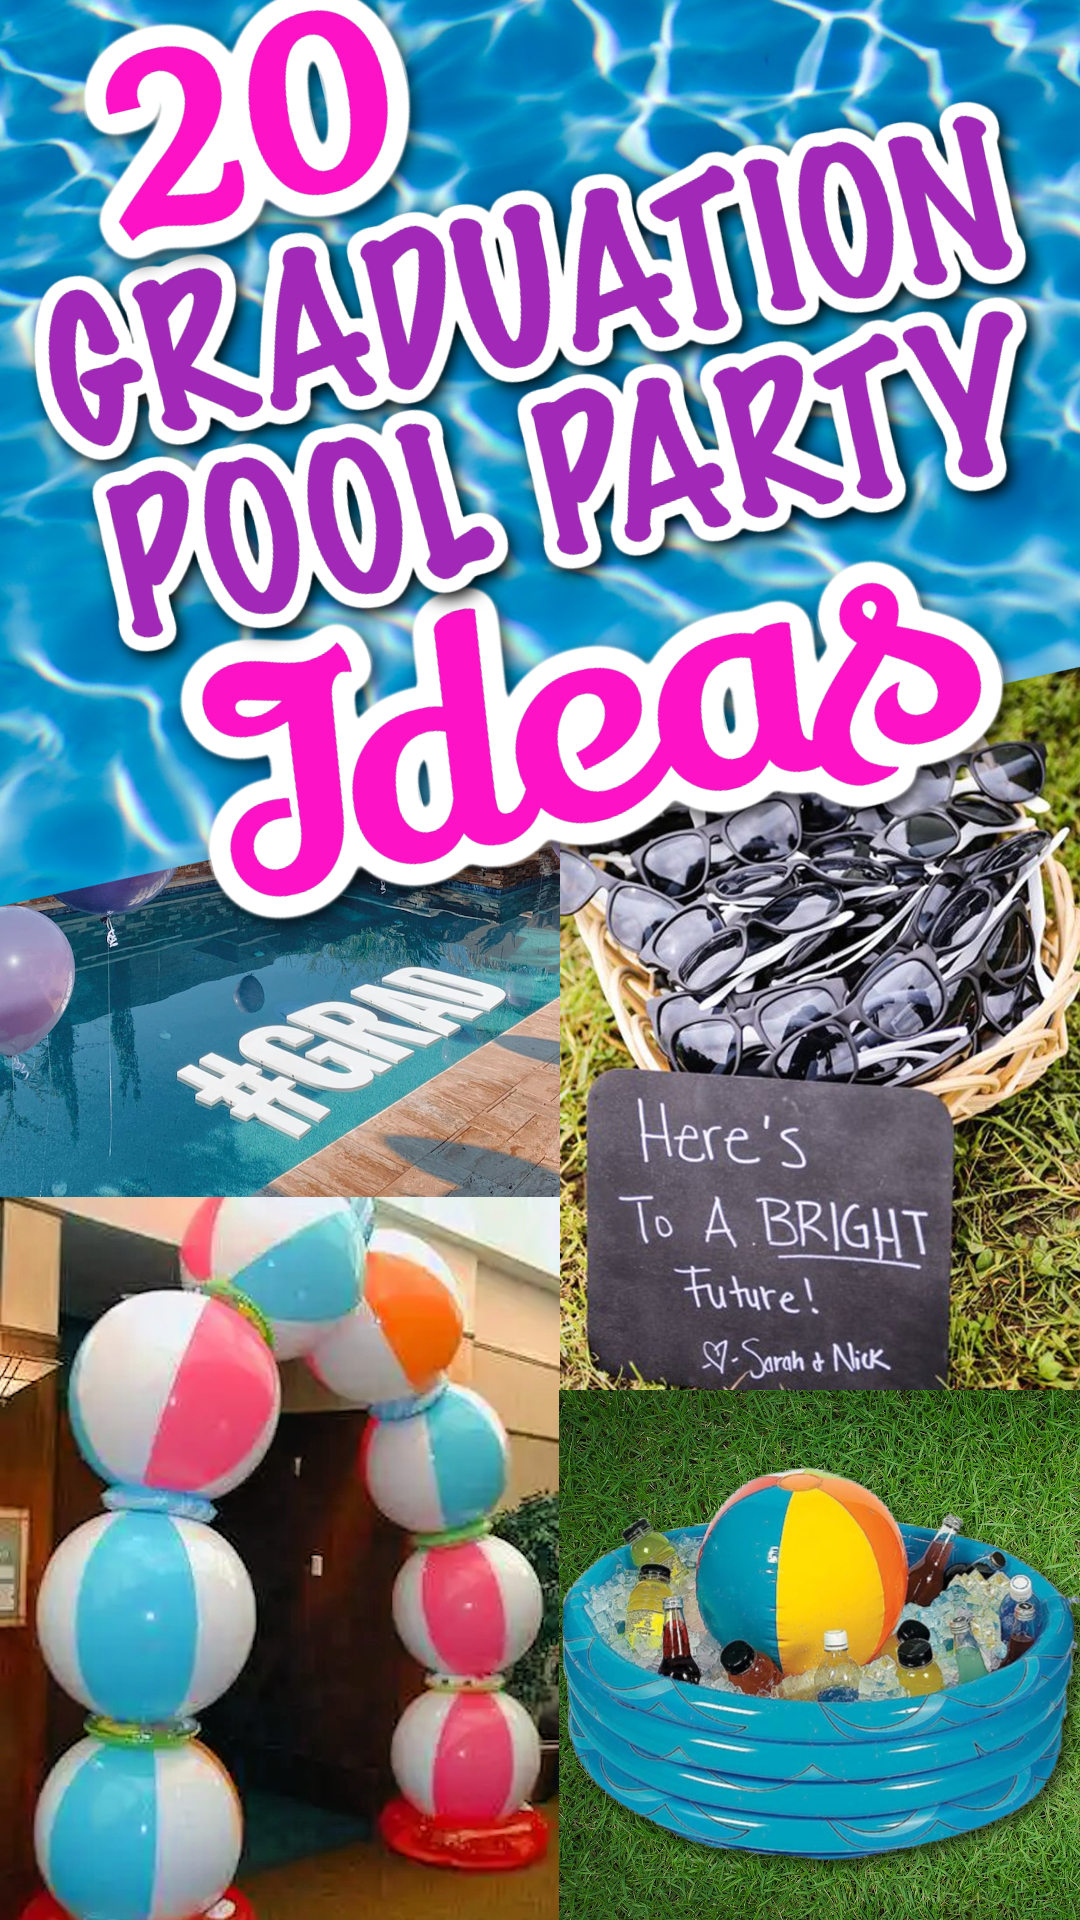 a collage of grad pool Party ideas including beachball themed foods and party decor, grad pool decoration and food ideas.